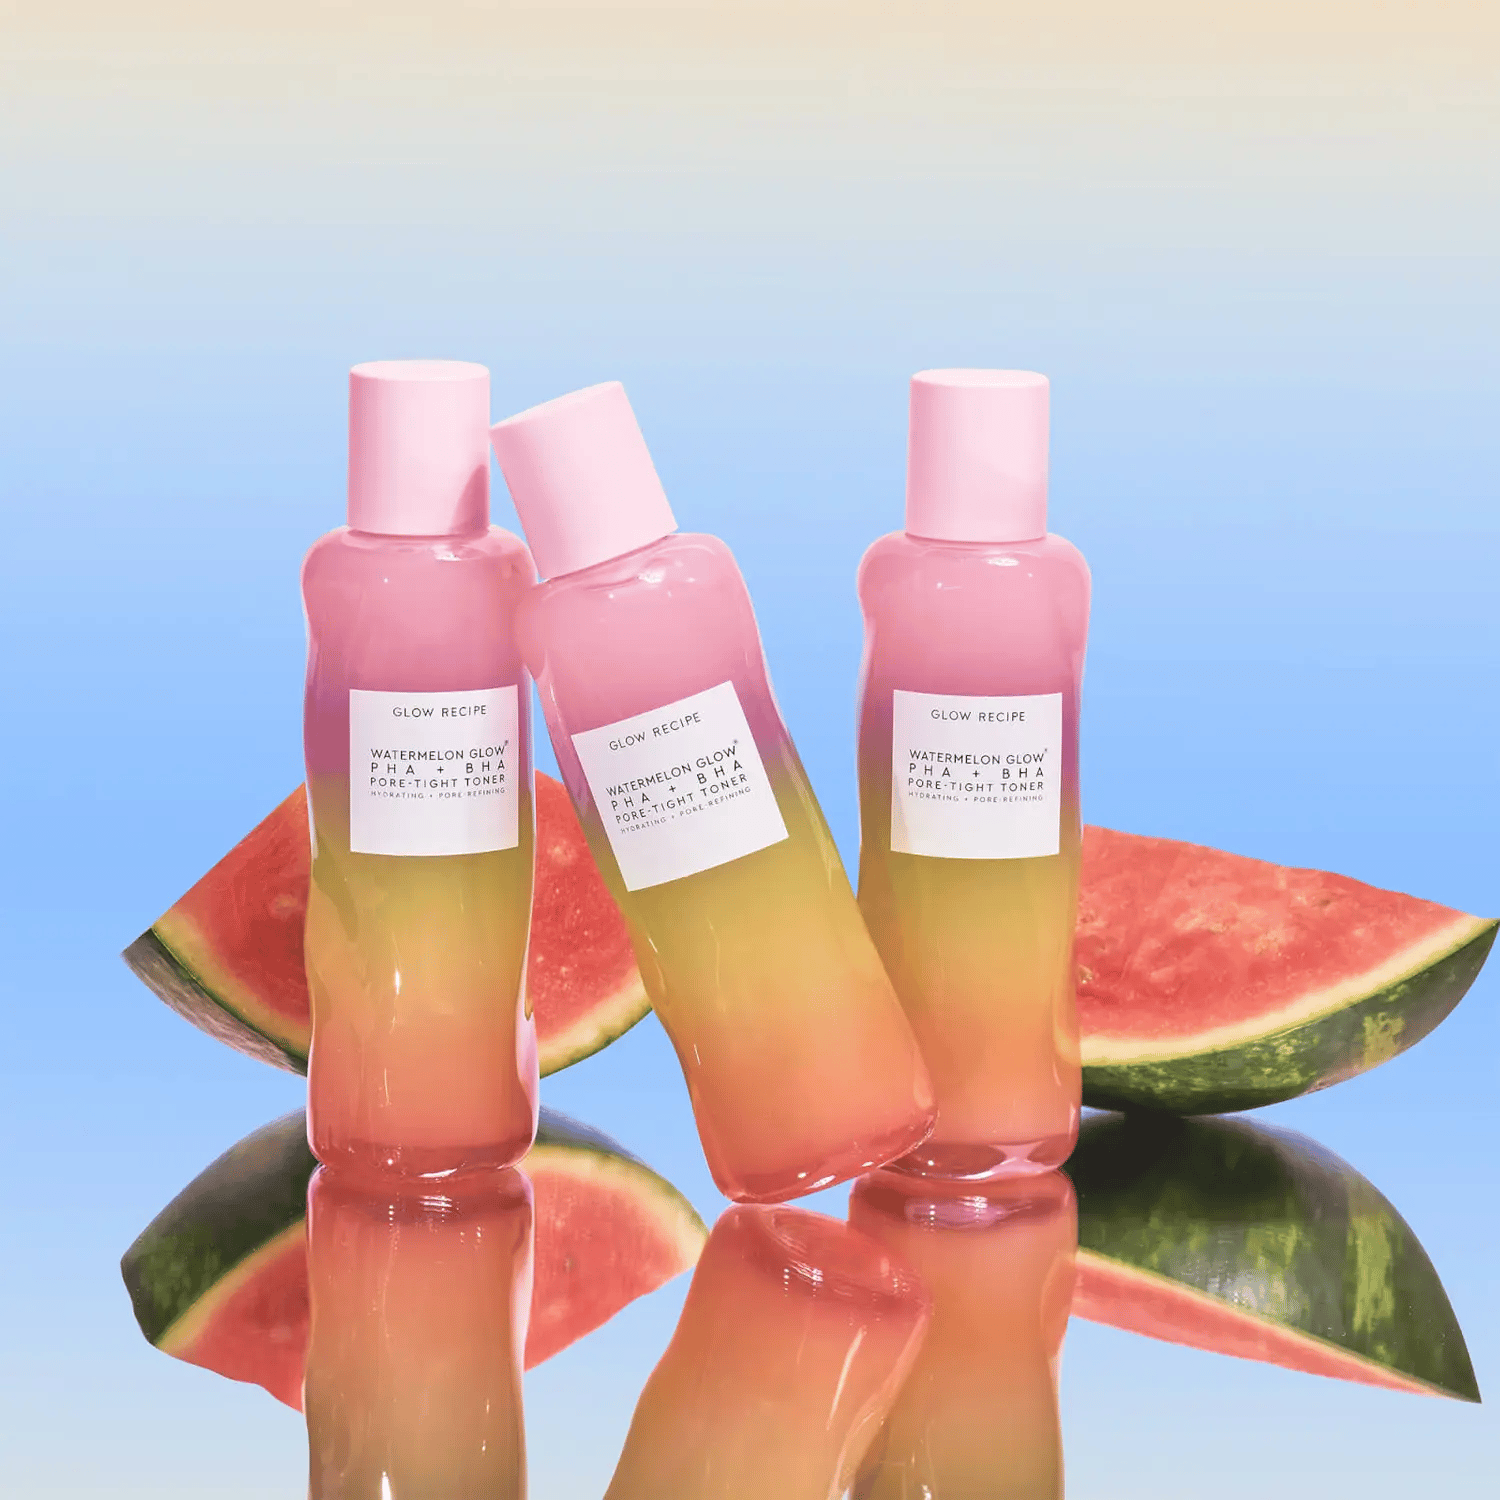 Glow Recipe has released a limited edition Pride toner.